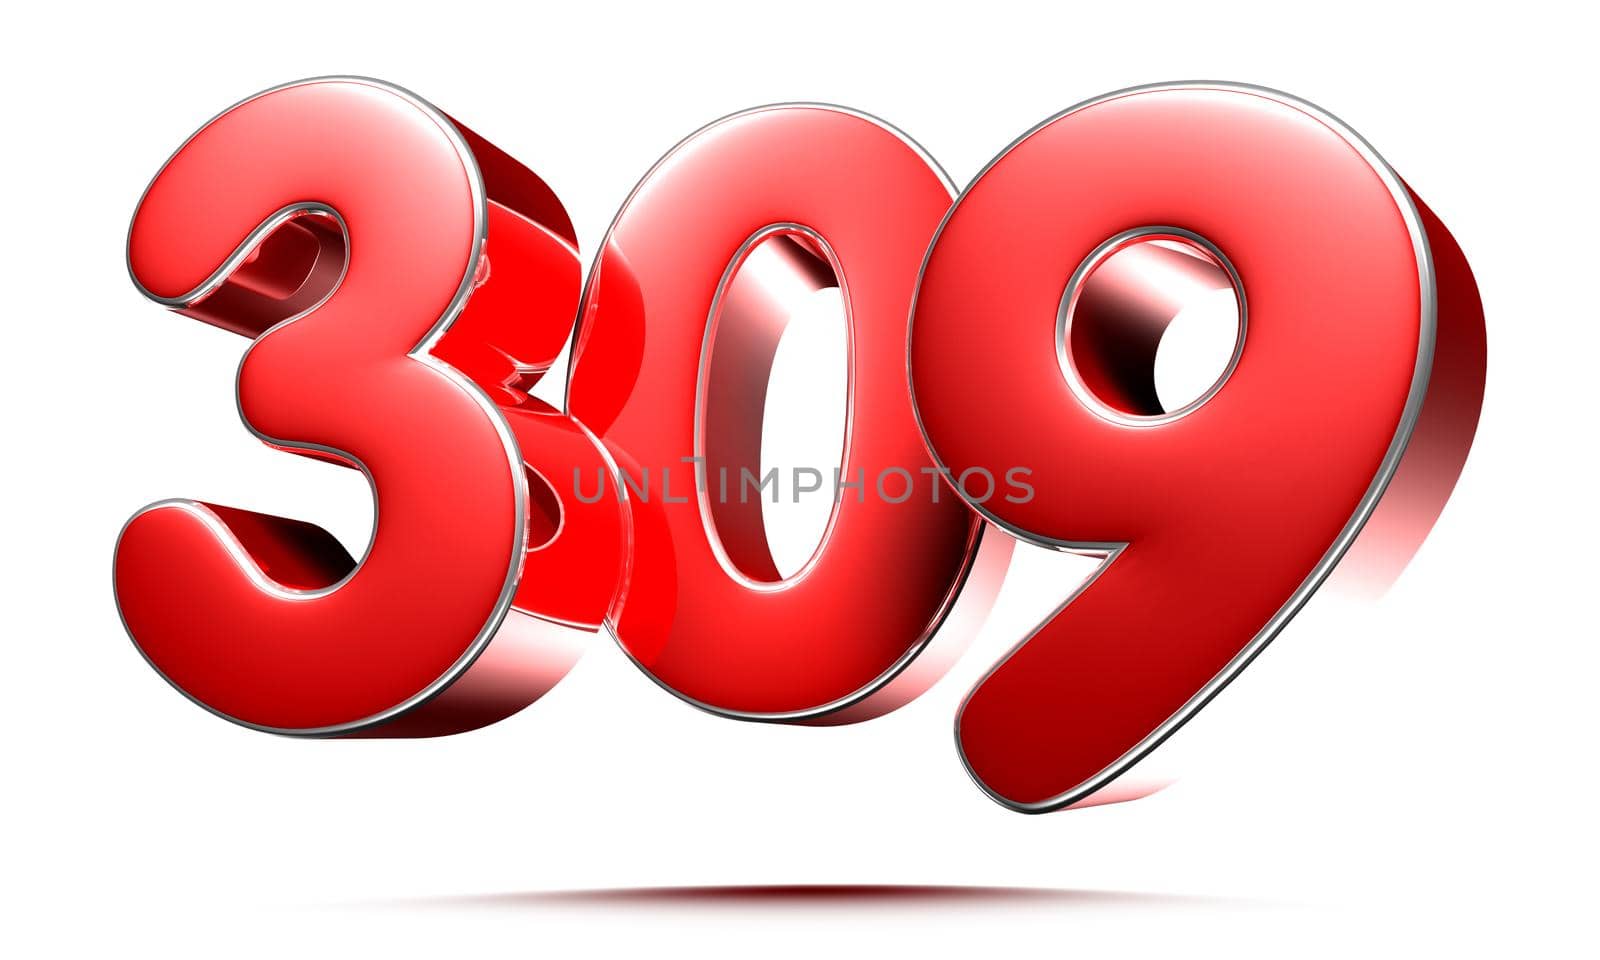 Rounded red numbers 309 on white background 3D illustration with clipping path